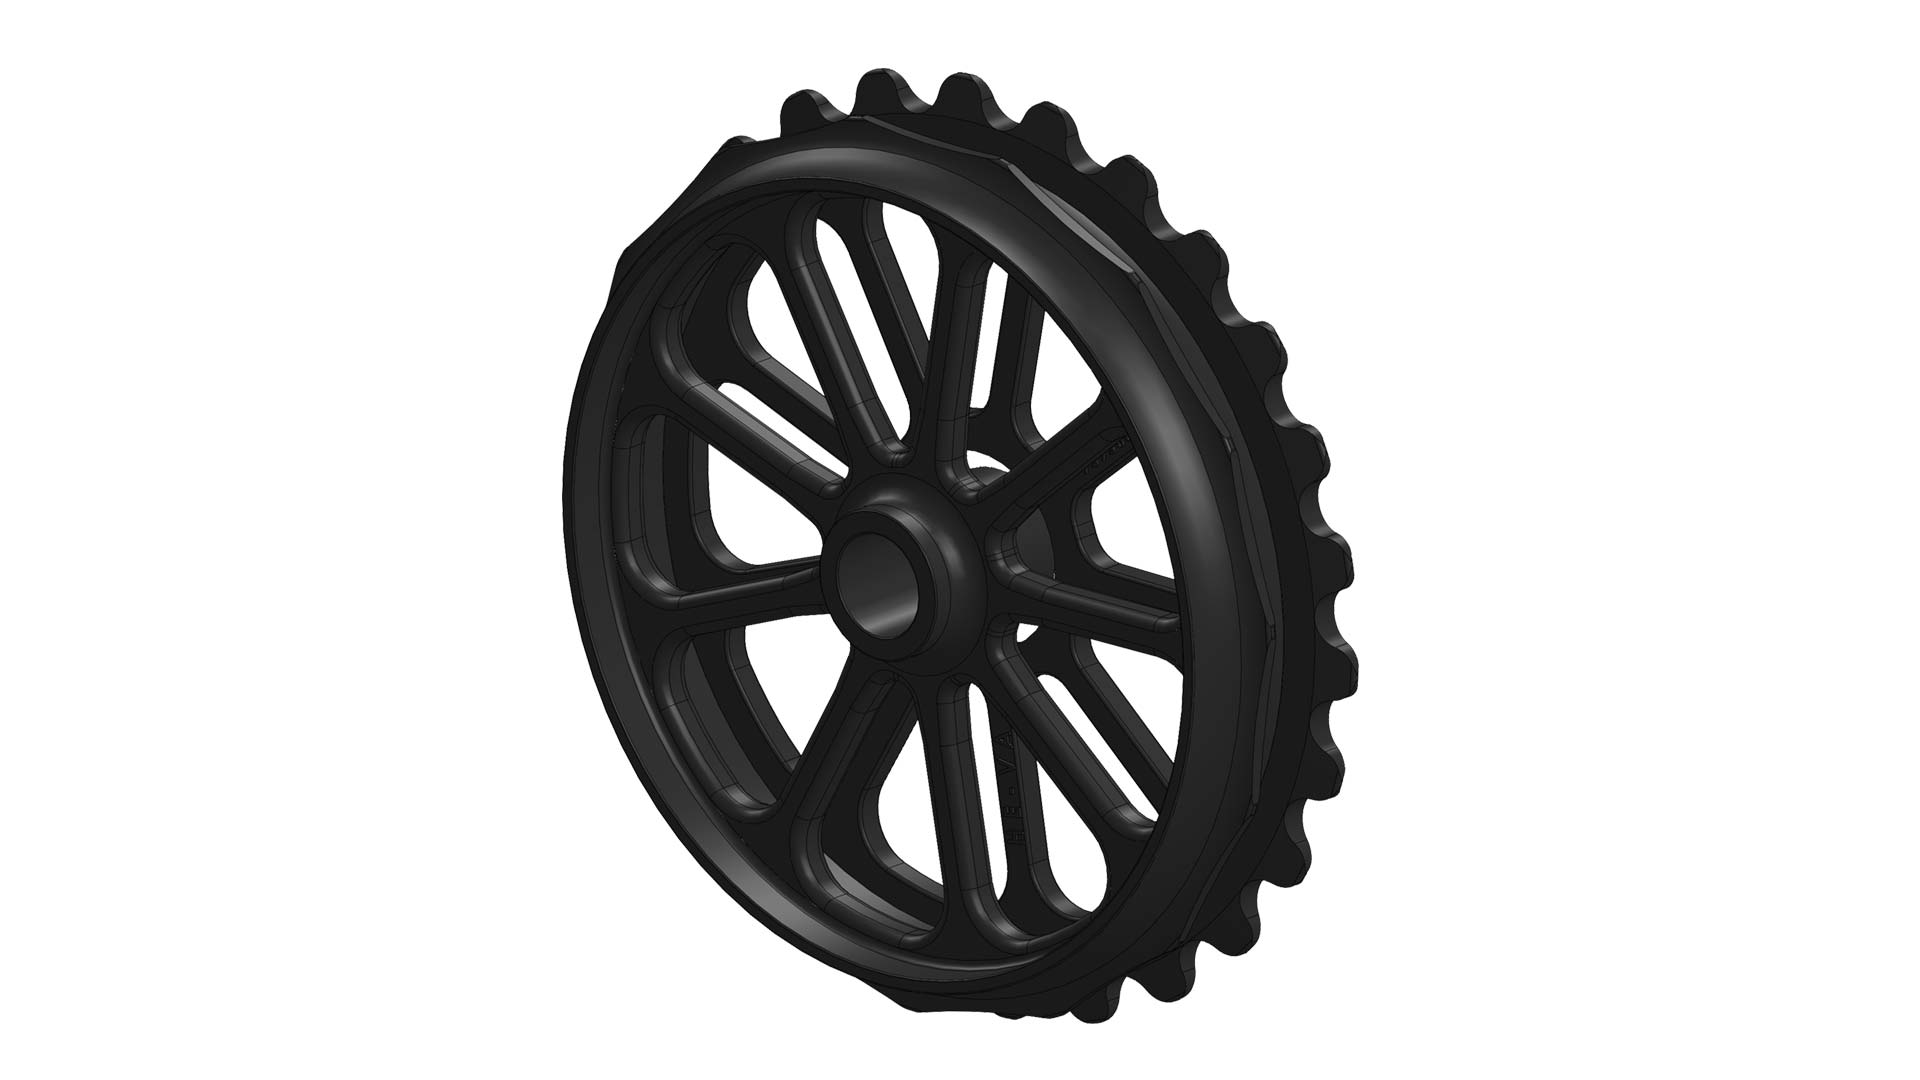 Front-Roller is available with 510 mm, 560 mm or 620 mm Cambridge rings with 3, 8, 9 or 10 spokes, suitable for crushing clods and consolidaion of the soil in the top 10 cm. Cambridge leaves the surface nicely structured and even. The breaker rings increase the aggressiveness on heavier soil and keep the rings clean.